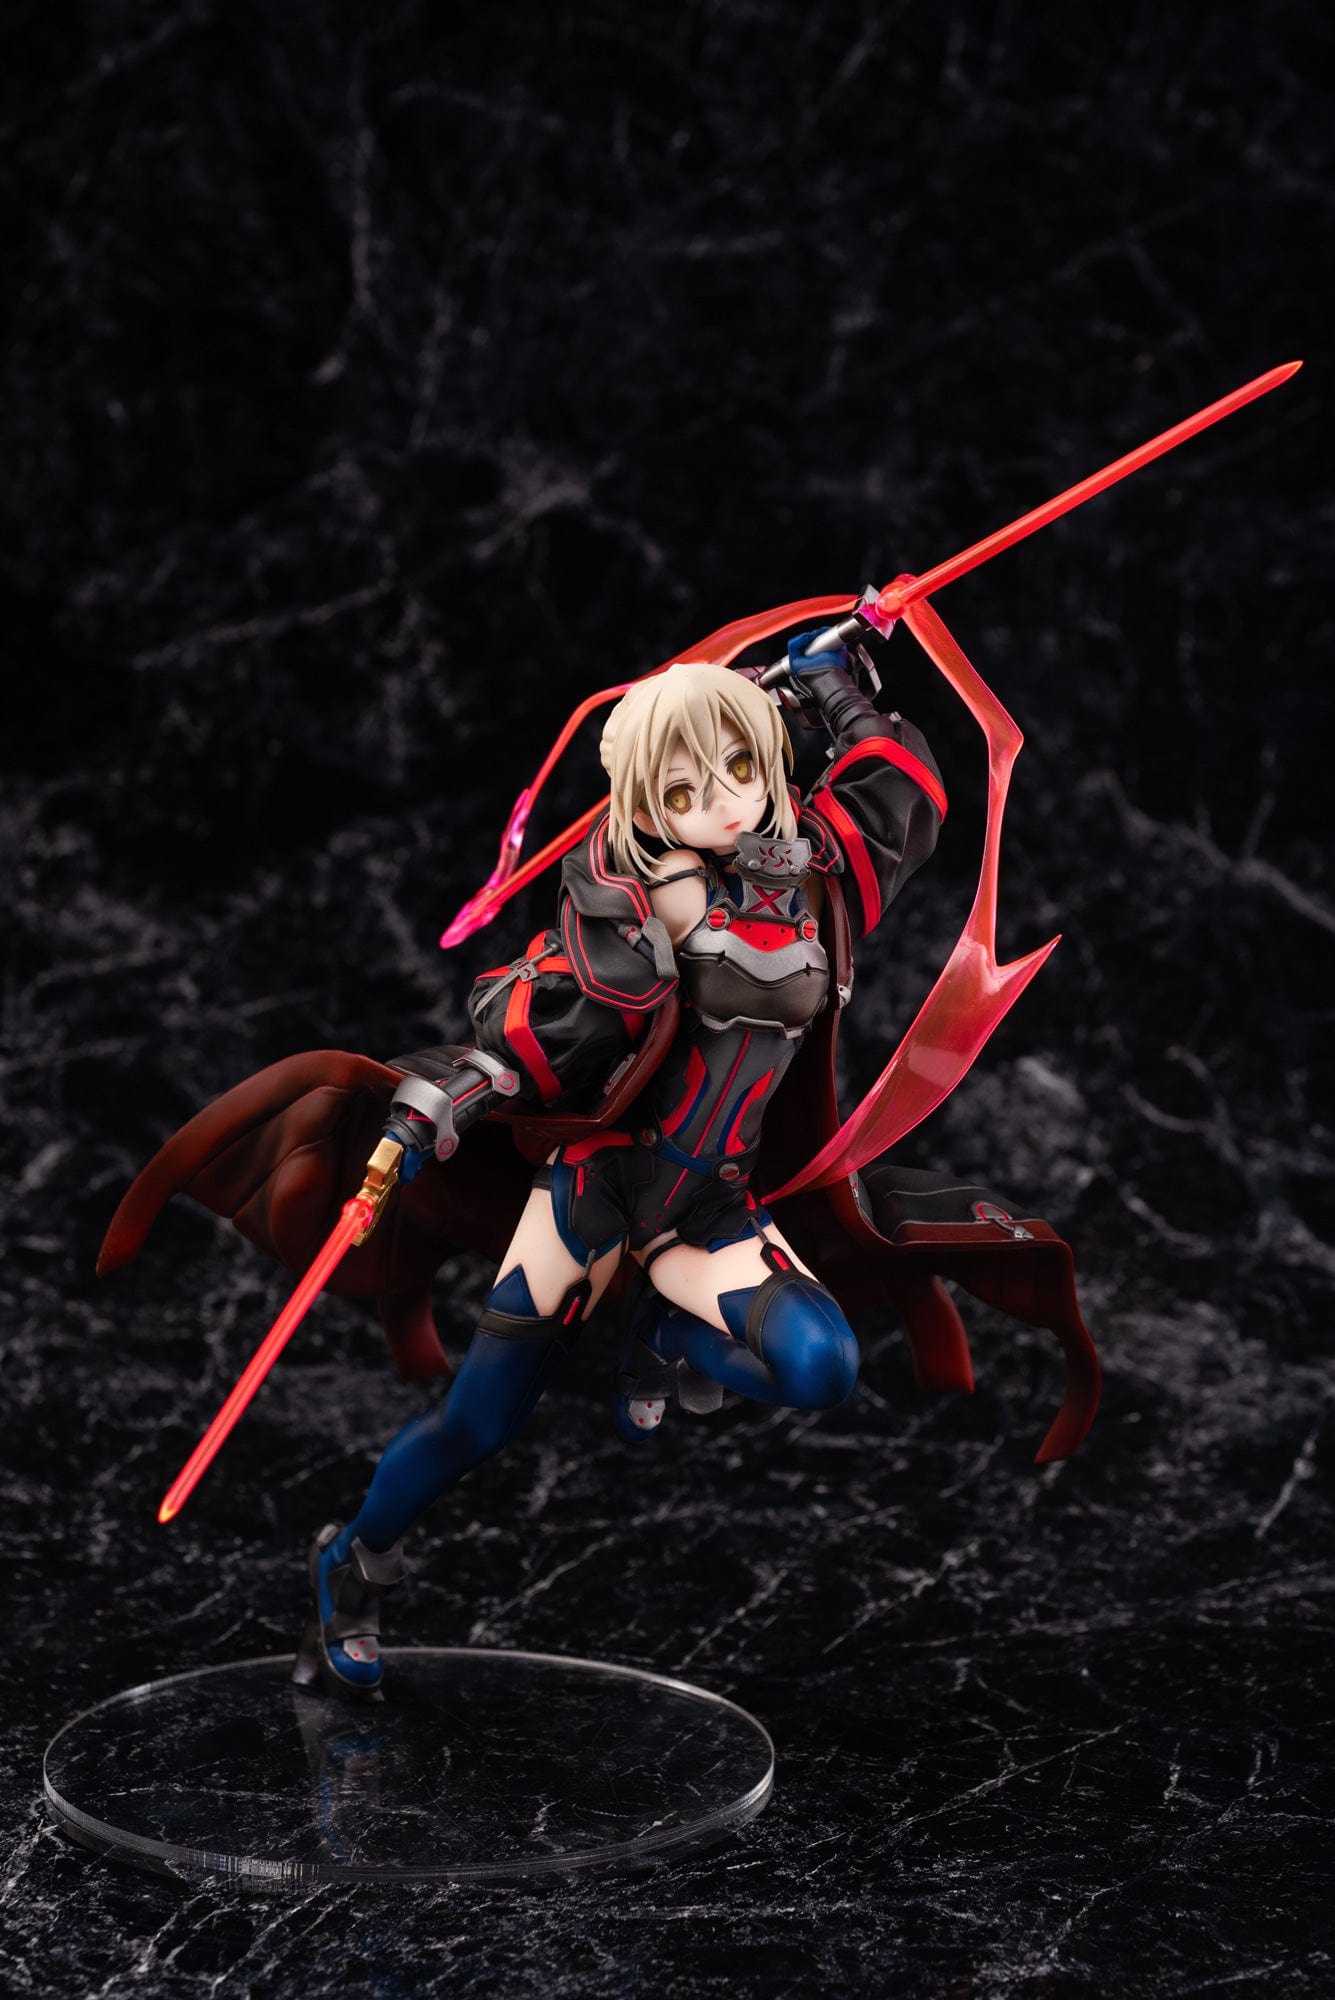 Aoshima Fate/Grand Order - Mysterious Heroine X Alter - 1/7th Scale Figure